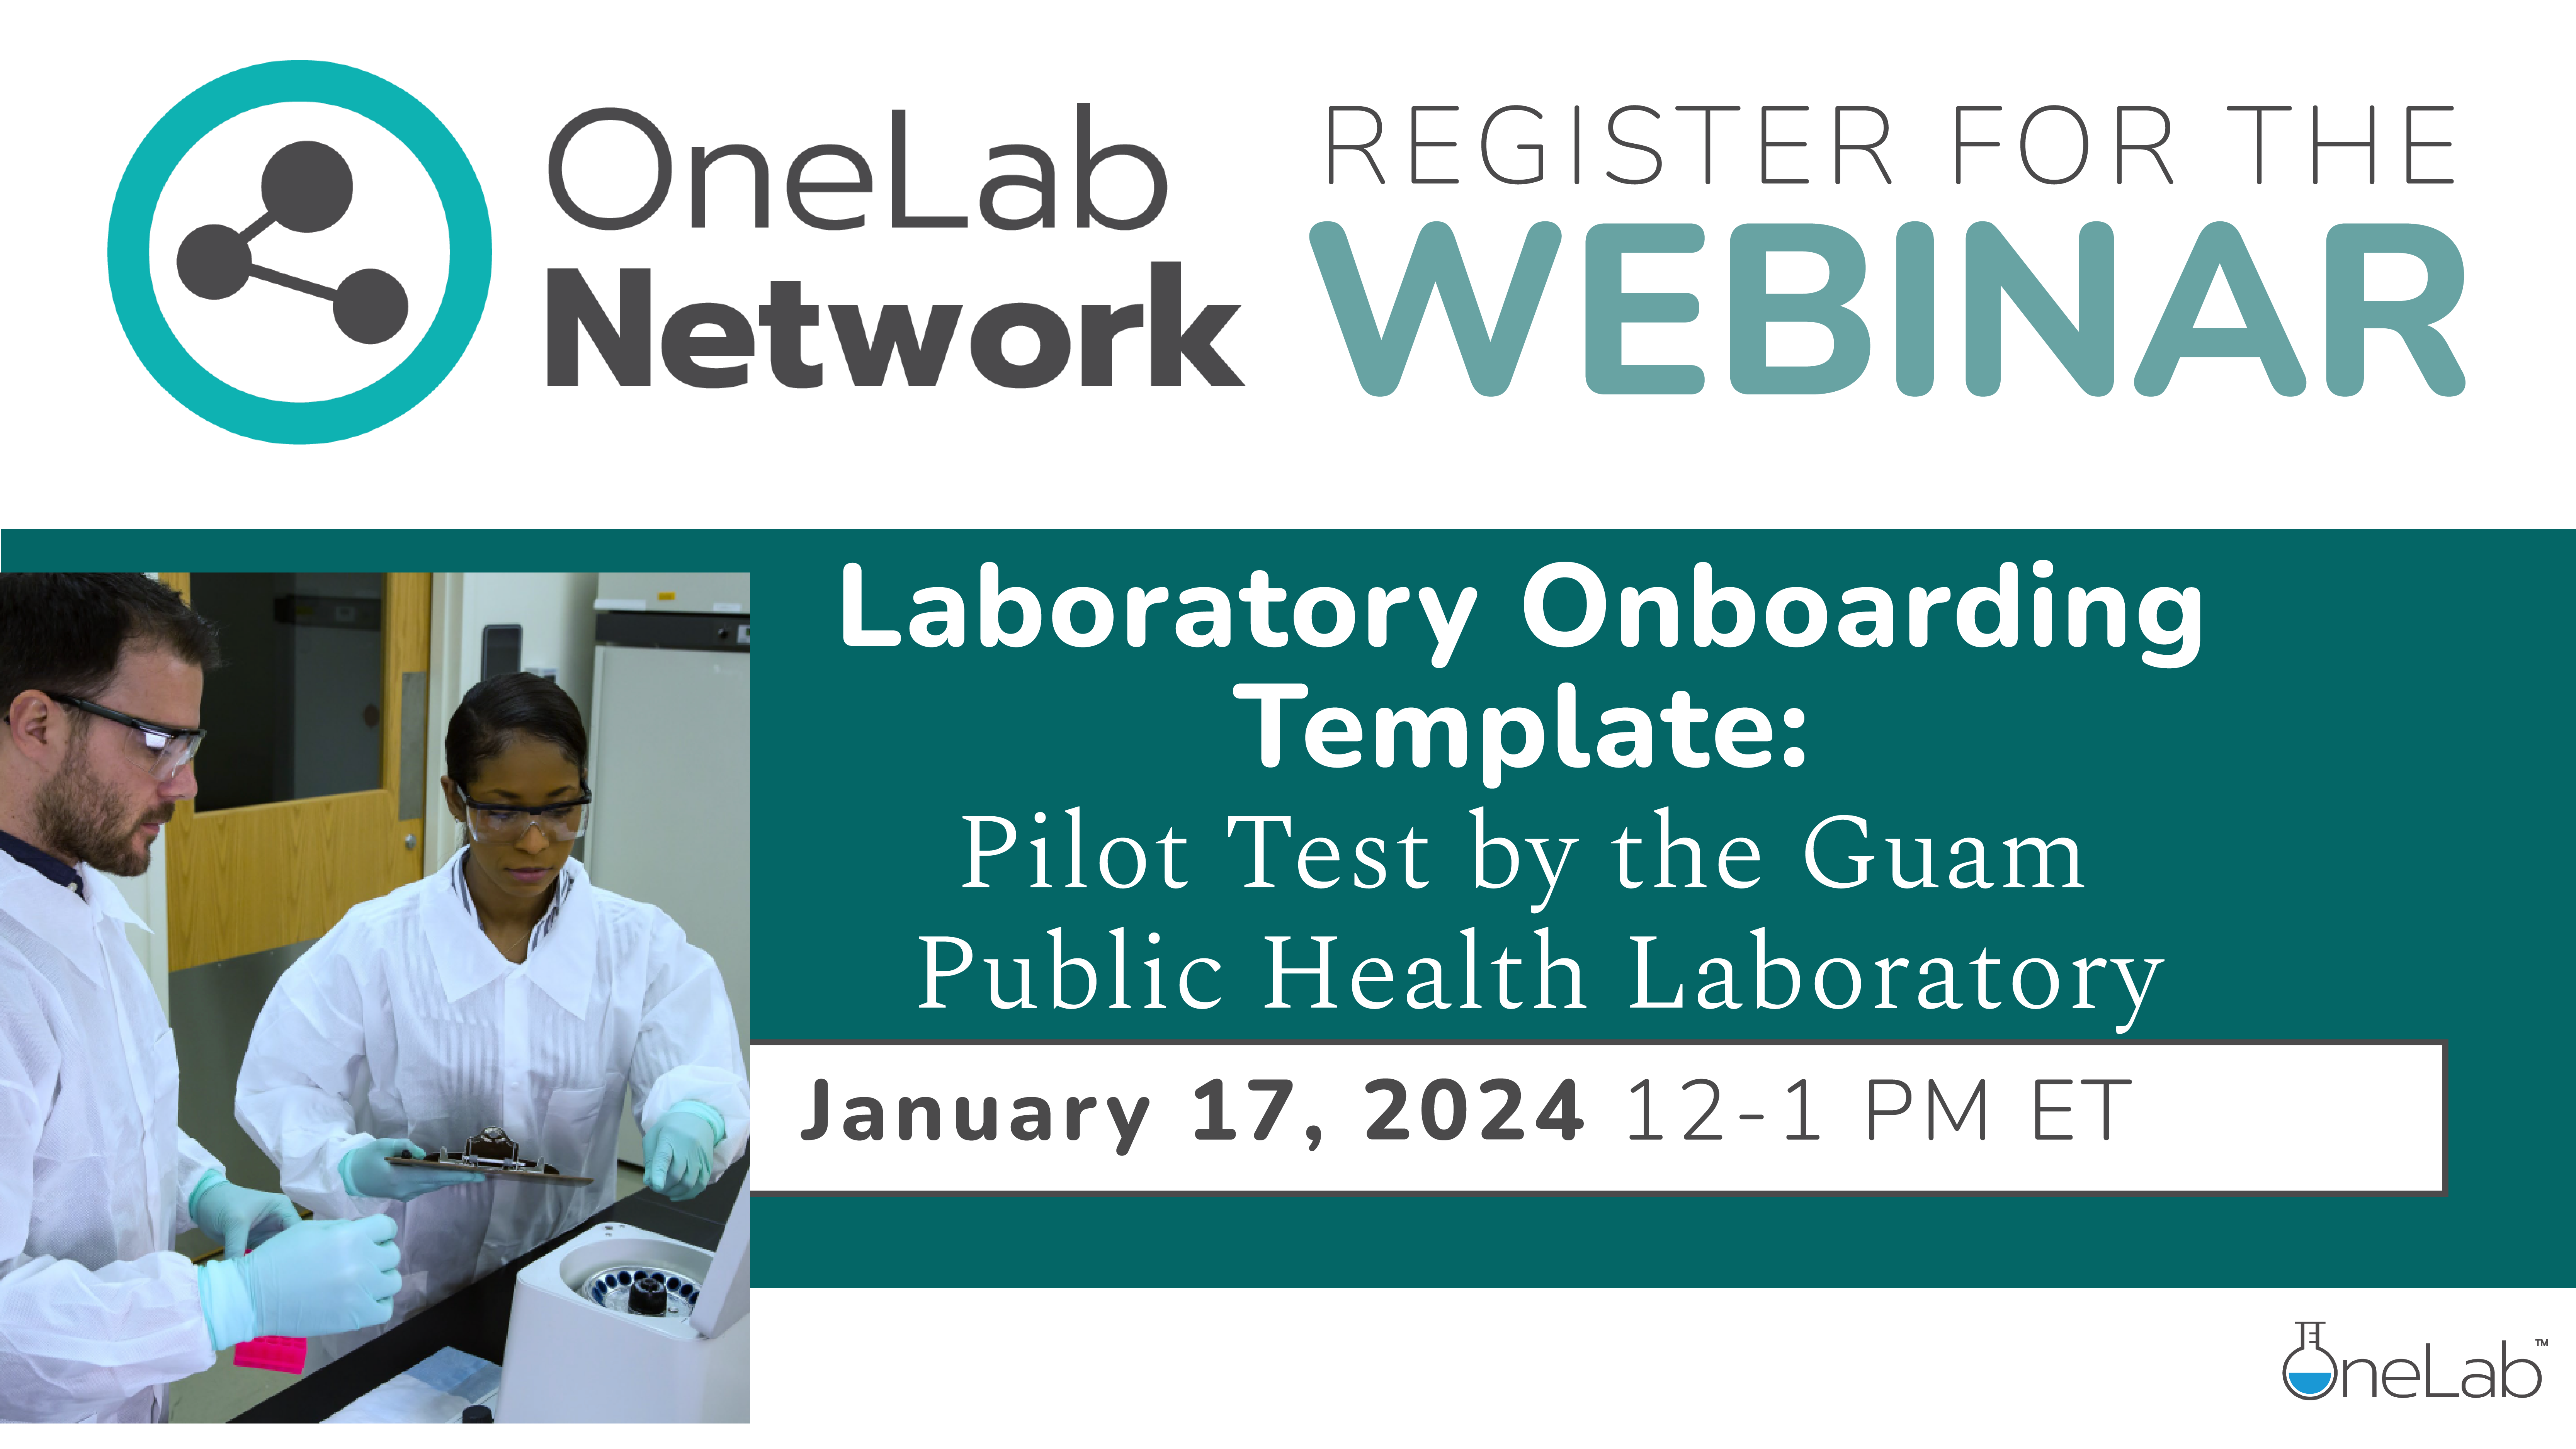 OneLab Network event January 17, 2023